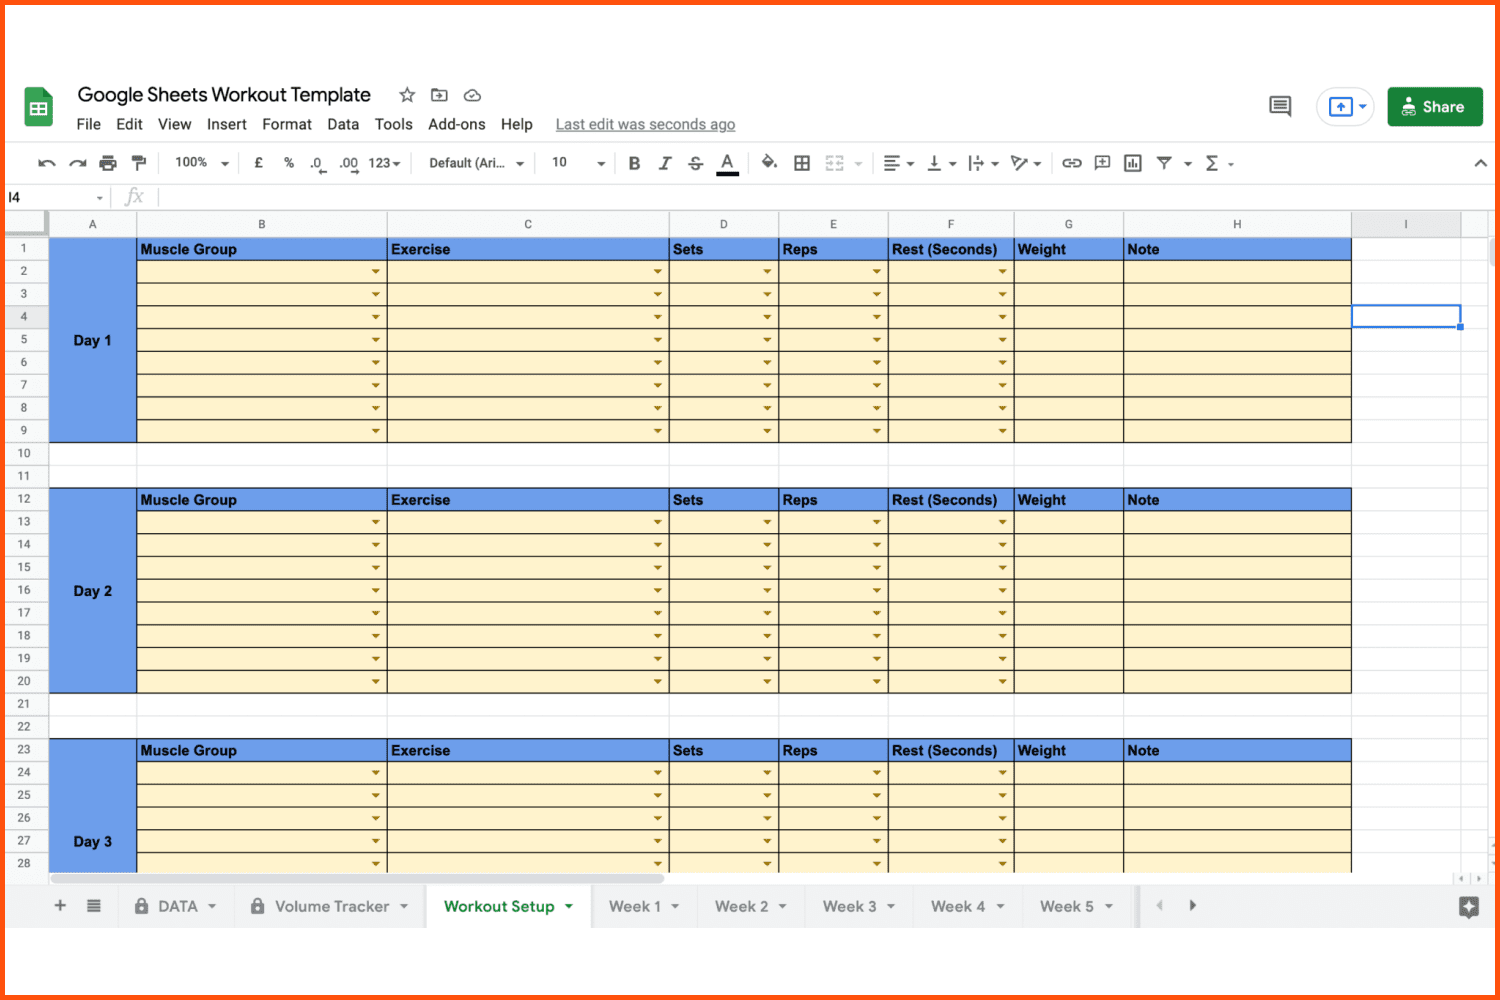 10+ Best Free Google Sheets Workout Planner Templates for 2022